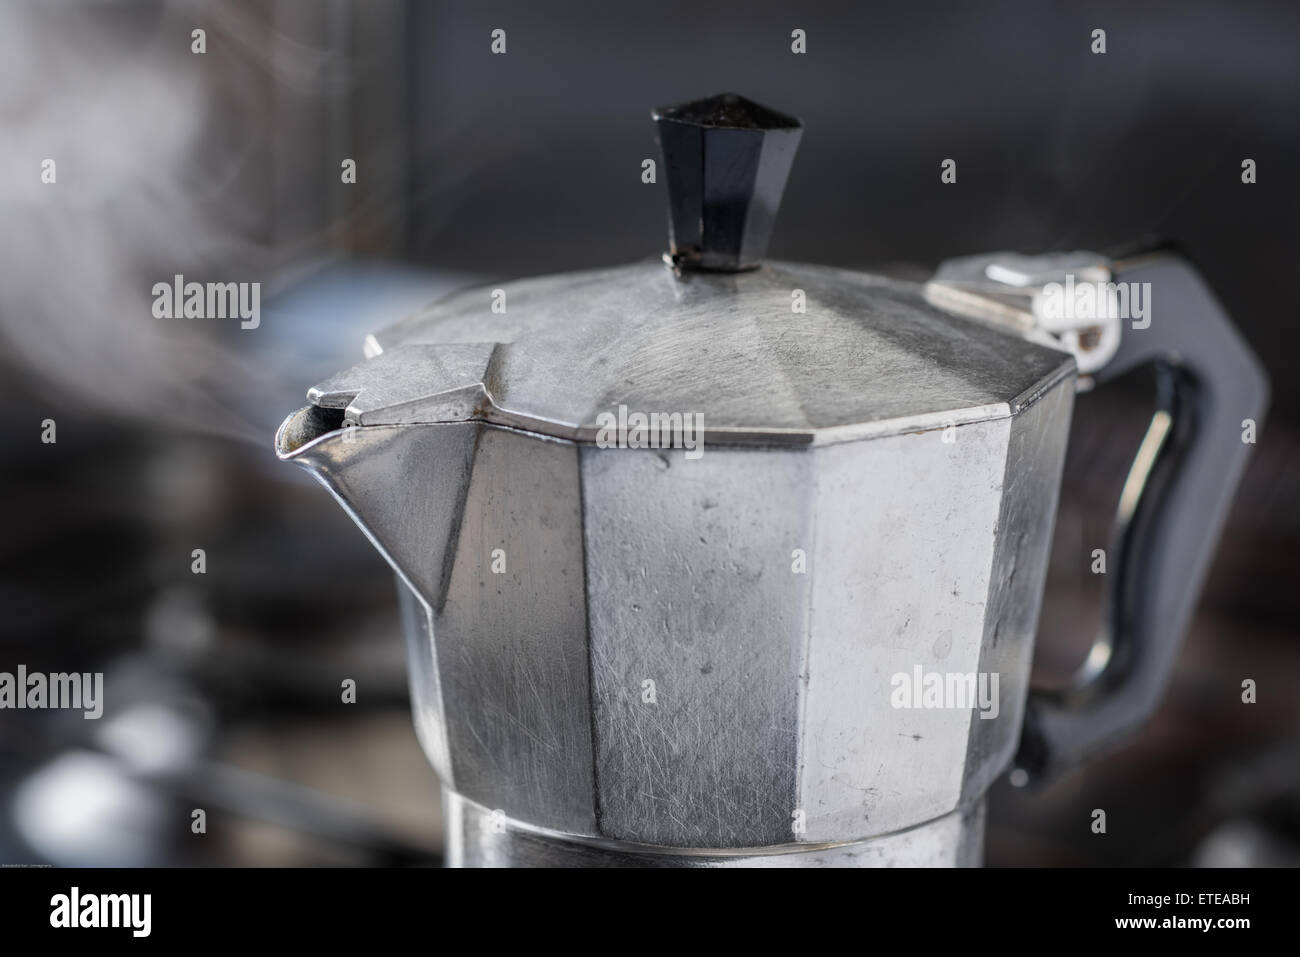 https://c8.alamy.com/comp/ETEABH/italian-traditional-coffeemaker-with-steam-blowing-out-from-the-spout-ETEABH.jpg